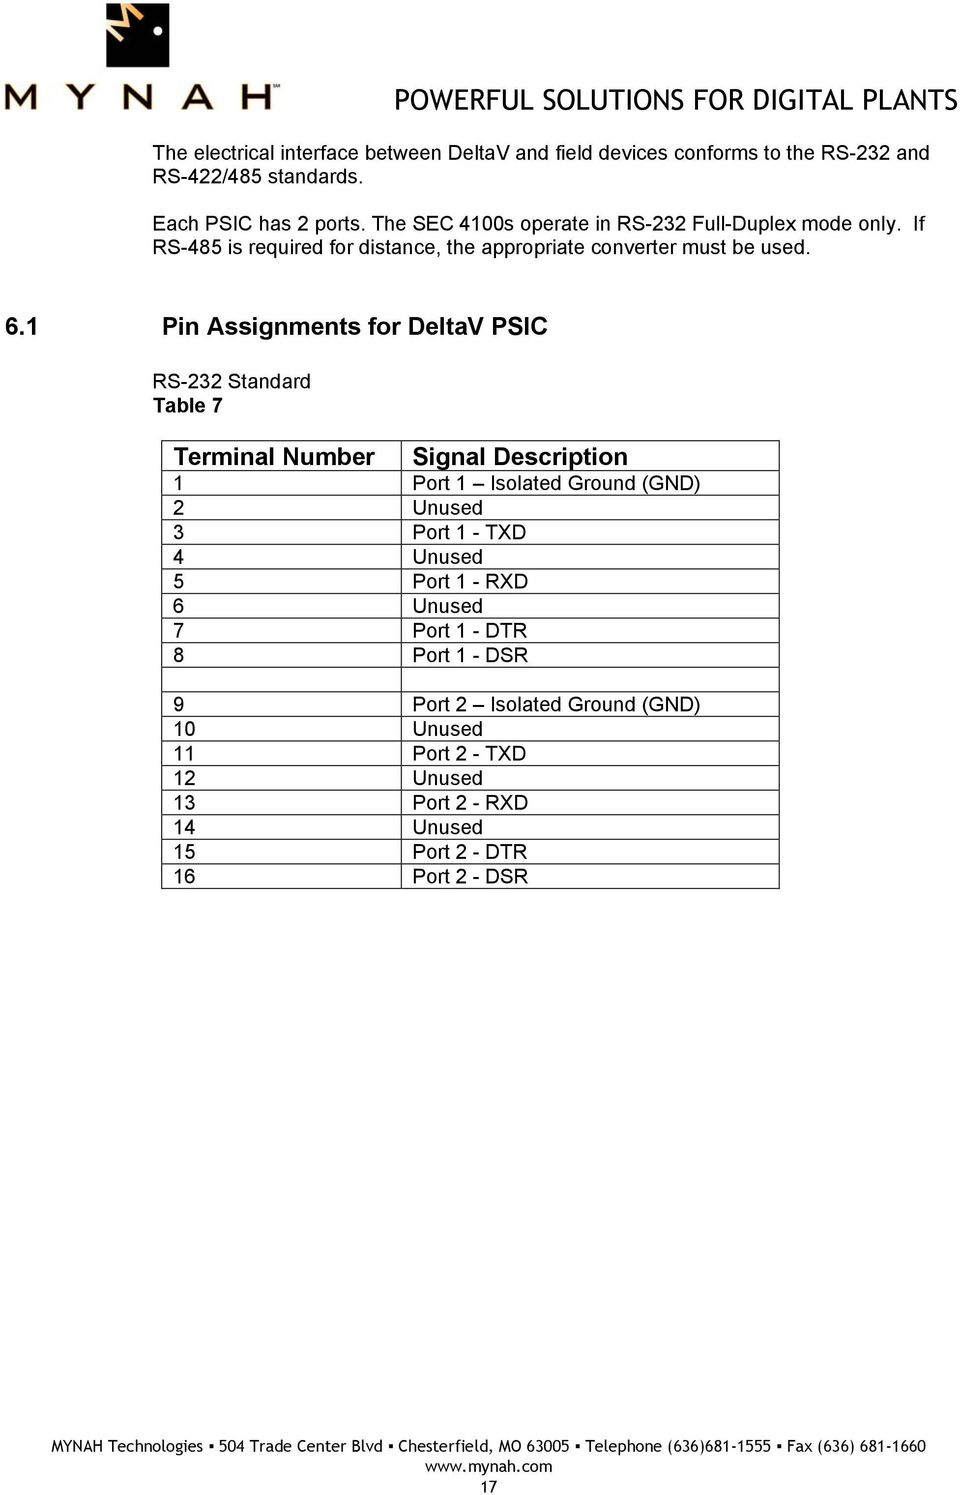 1 Pin Assignments for DeltaV PSIC RS-232 Standard Table 7 Terminal Number Signal Description 1 Port 1 Isolated Ground (GND) 2 Unused 3 Port 1 - TXD 4